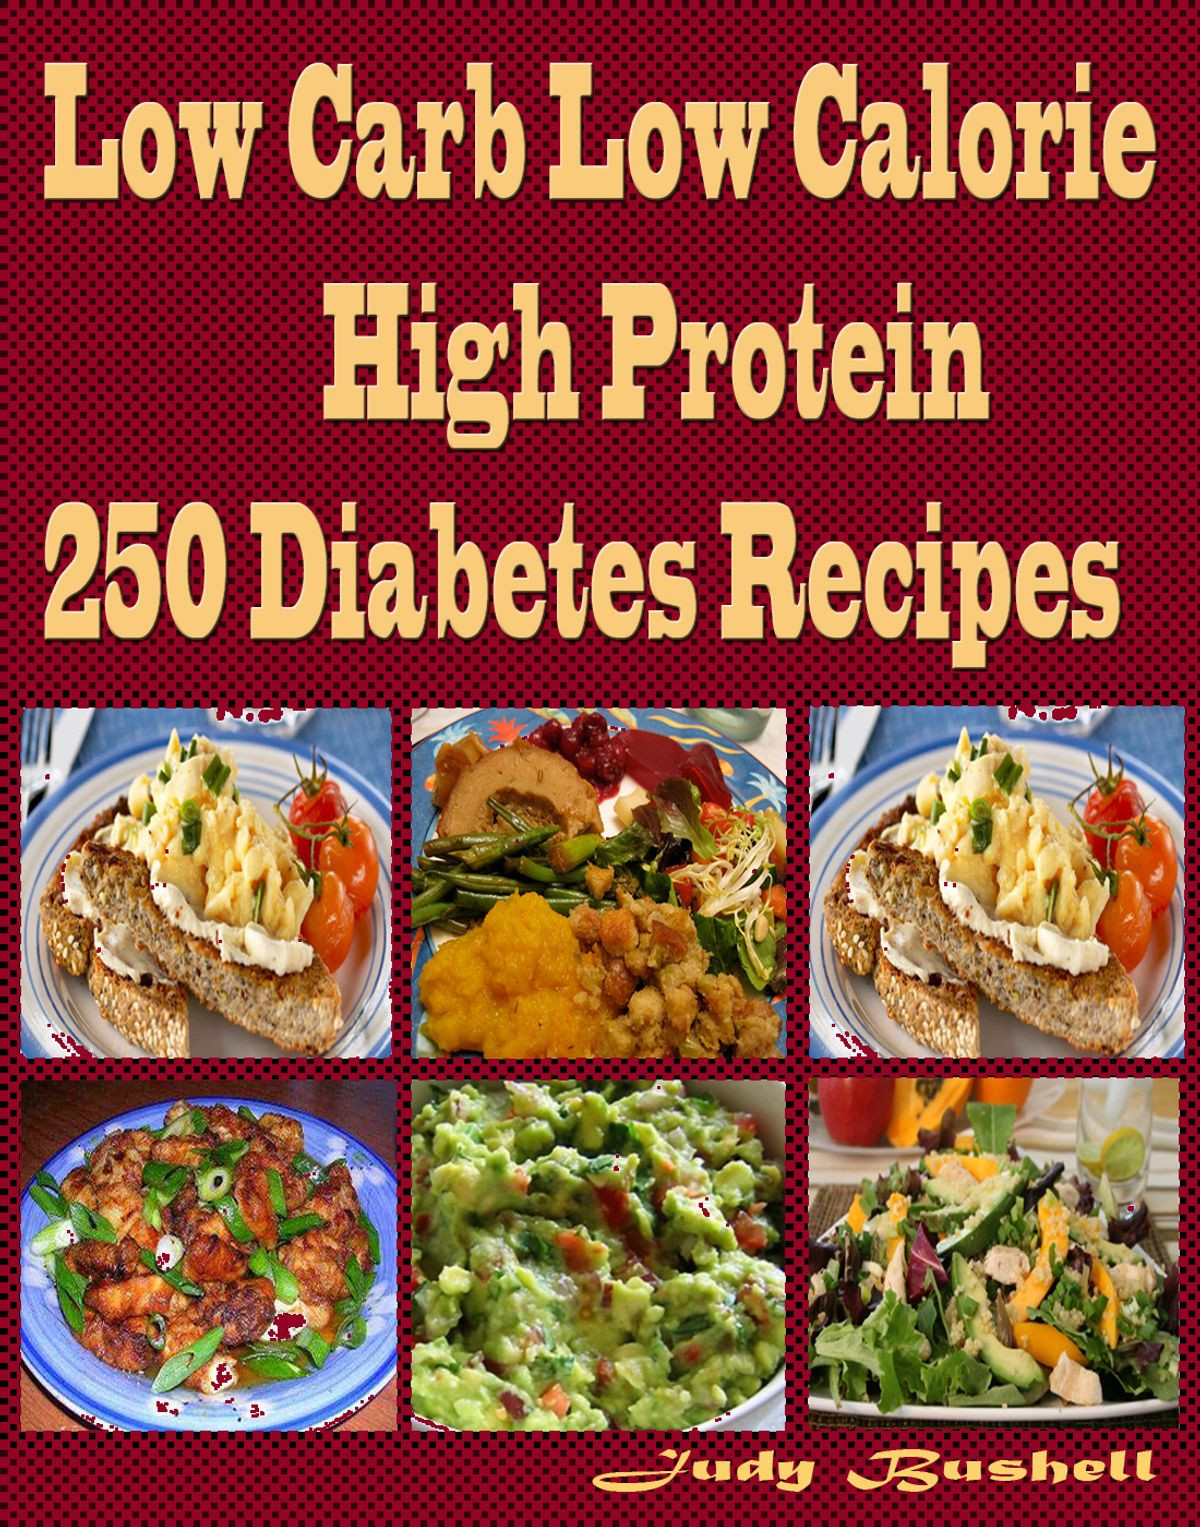 Low Carb High Protein Recipes
 Low Carb Low Calorie High Protein 250 Diabetes Recipes